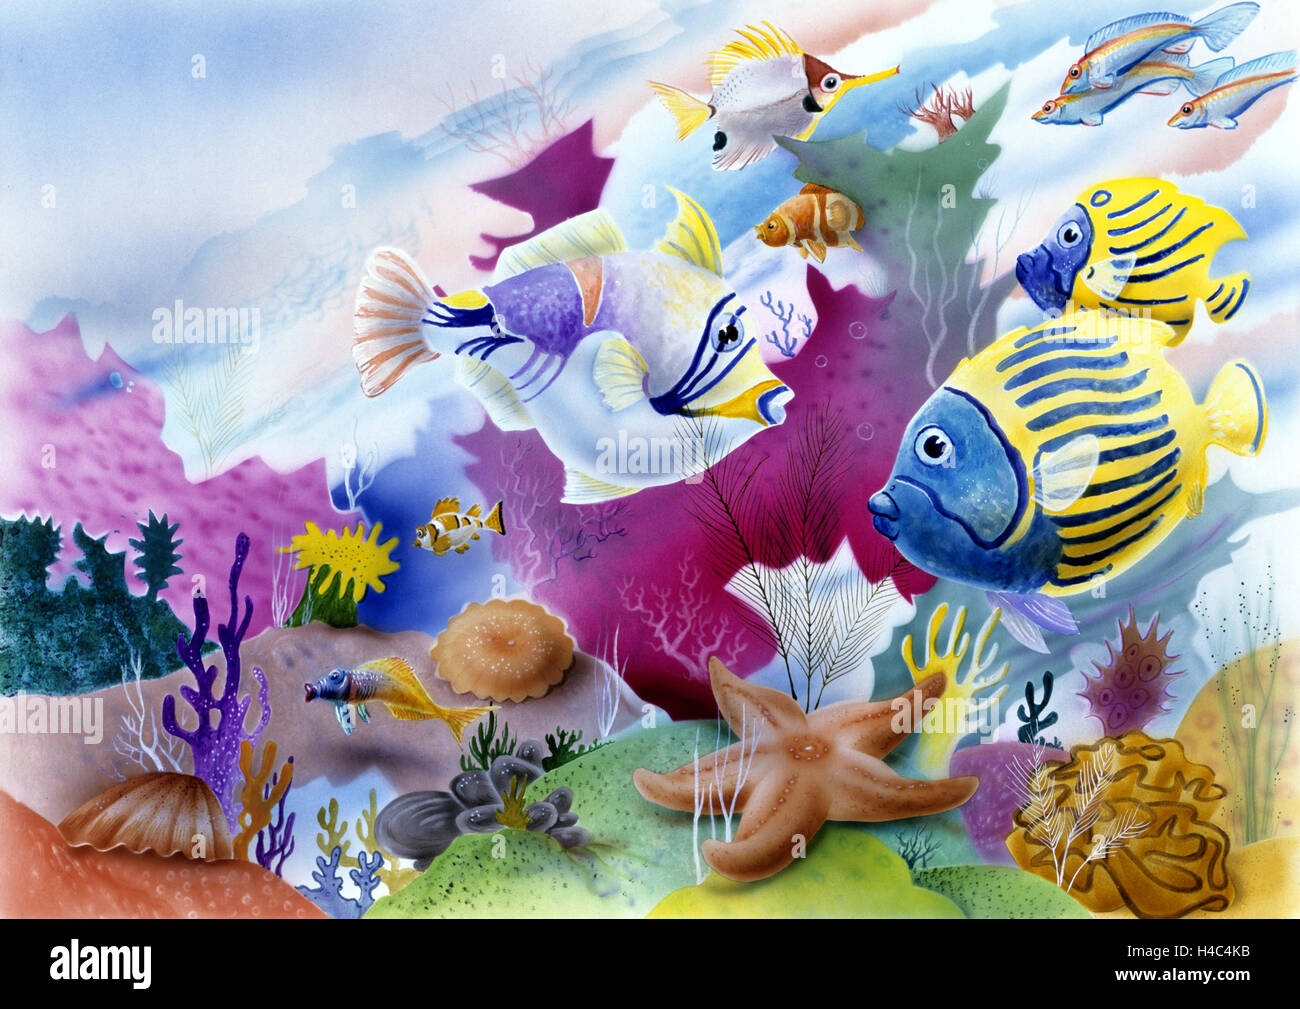 Underwater shot with corals, fishes and starfish Stock Photo